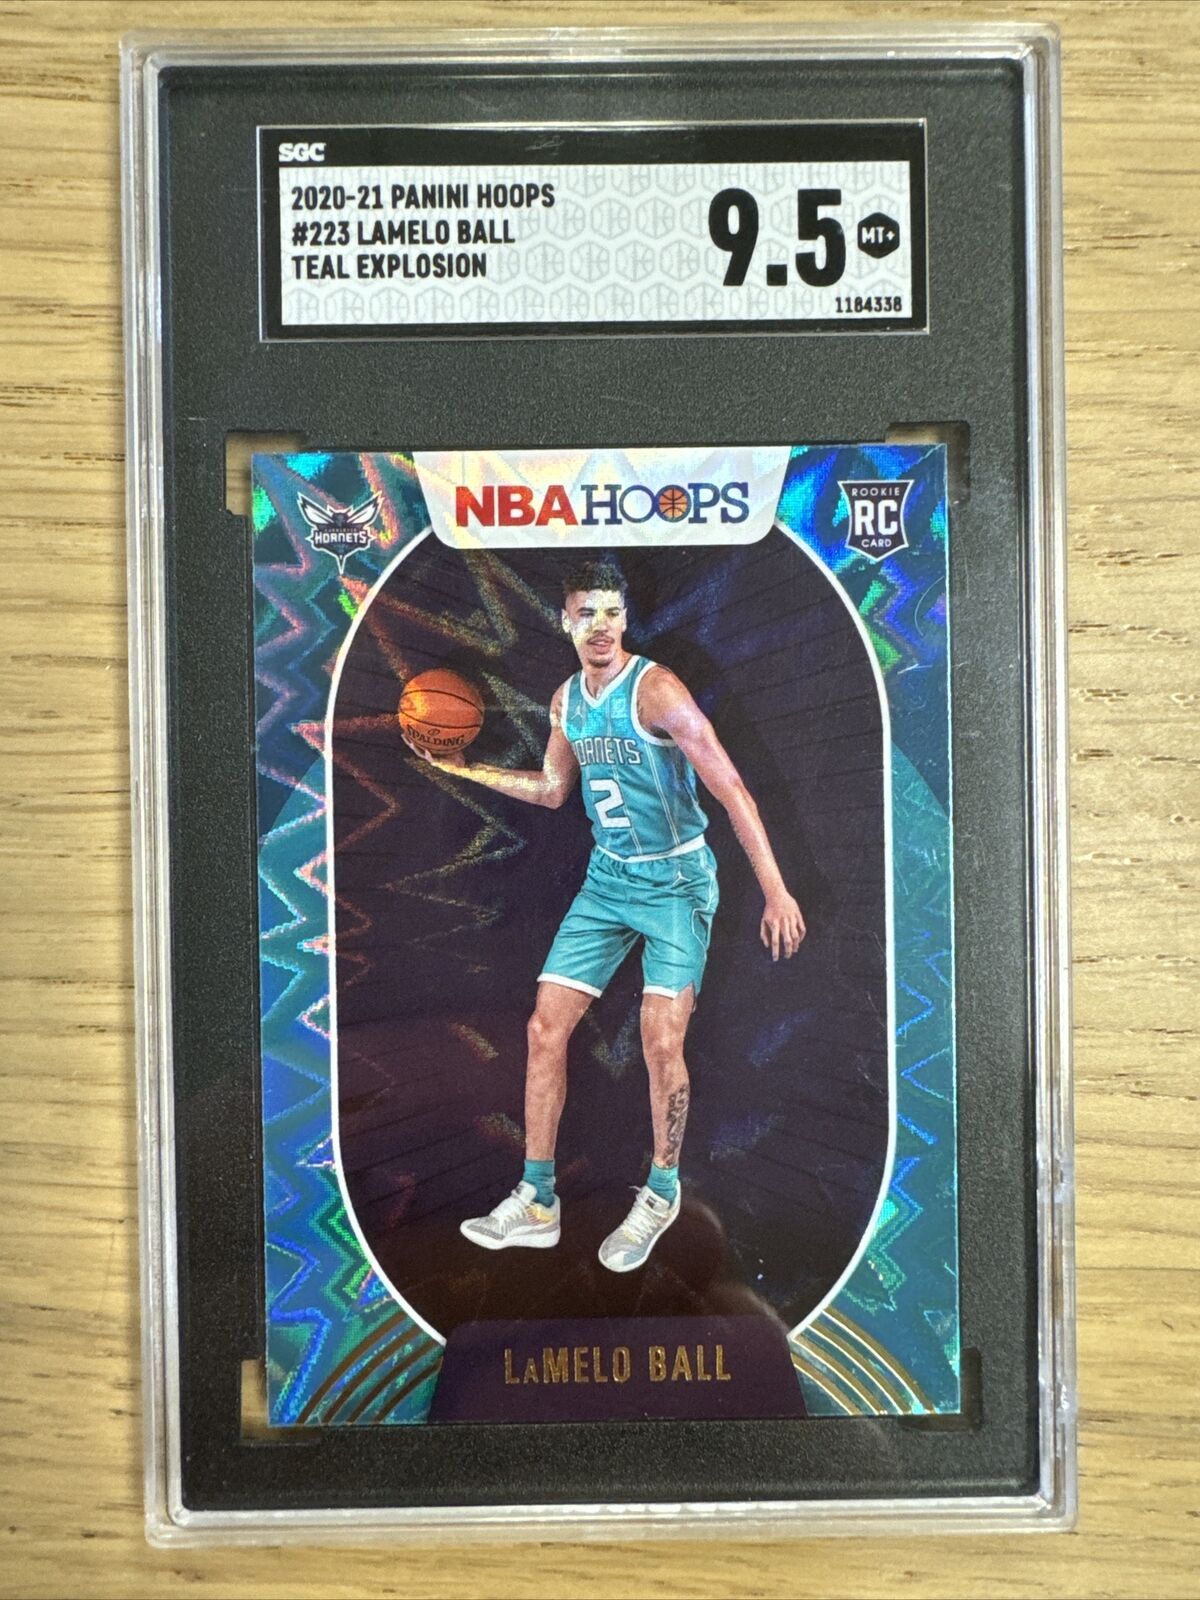 2020 Lamelo Ball Rookie Teal Explosion Panini Hoops SGC 9.5